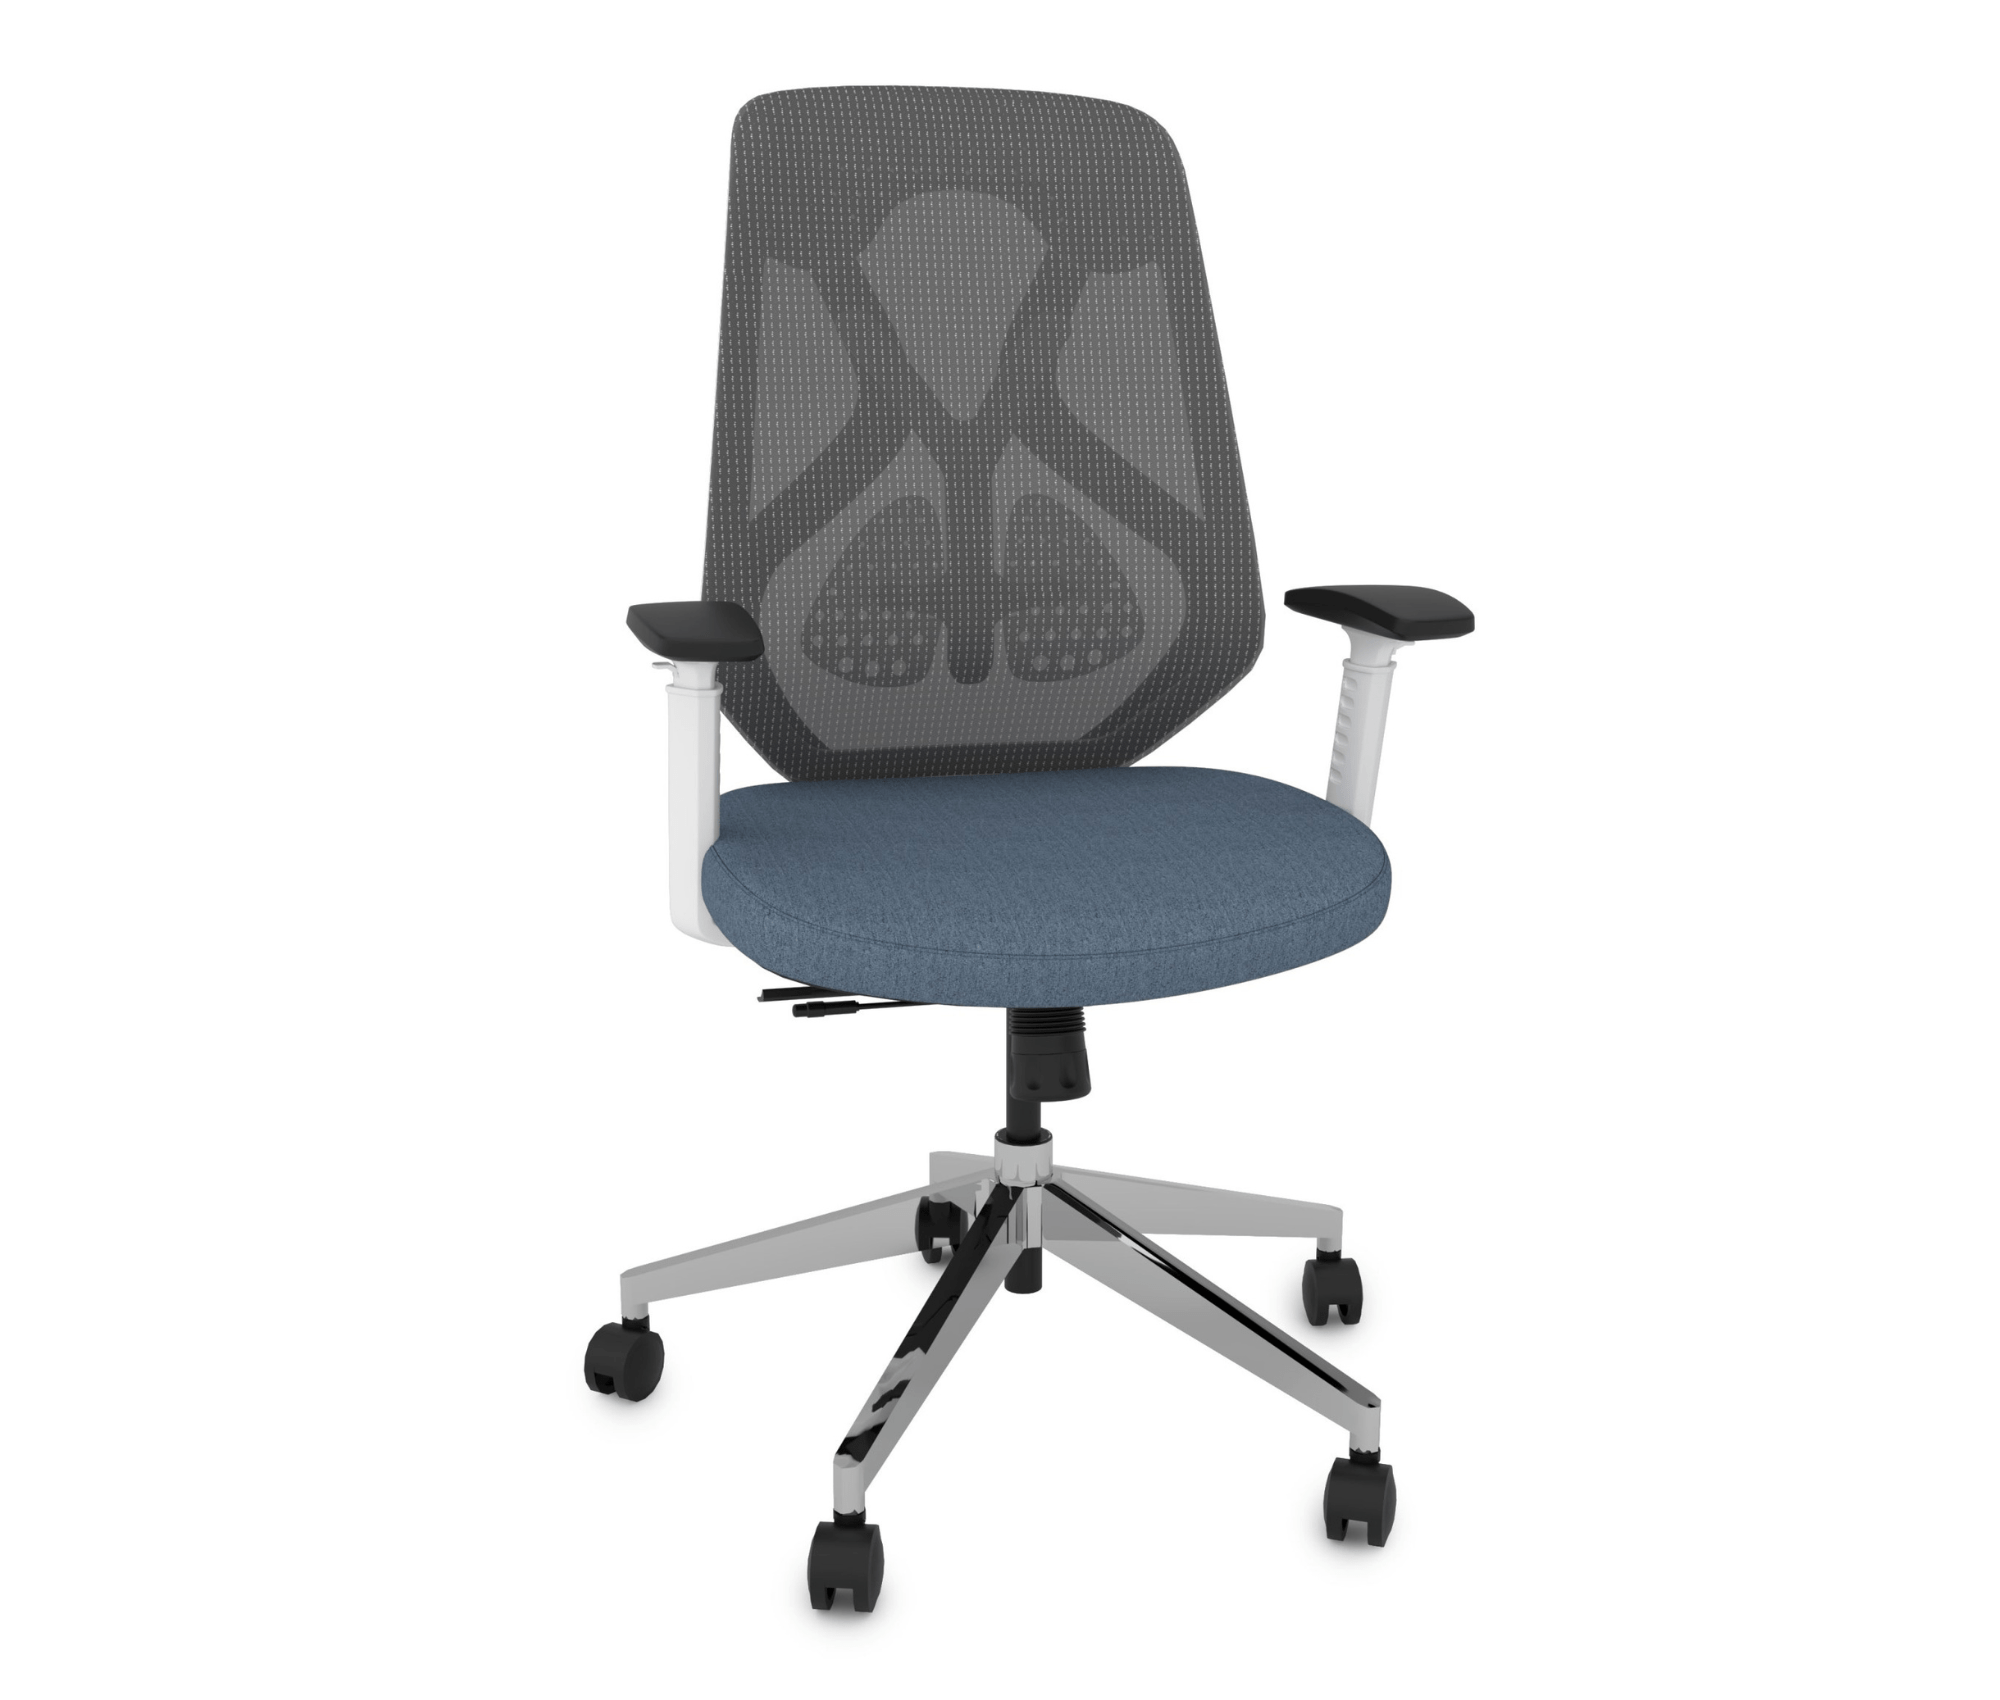 Ergonomic Plus Chair | Posture-Correcting Office Chair Porvata Office Chairs Blue